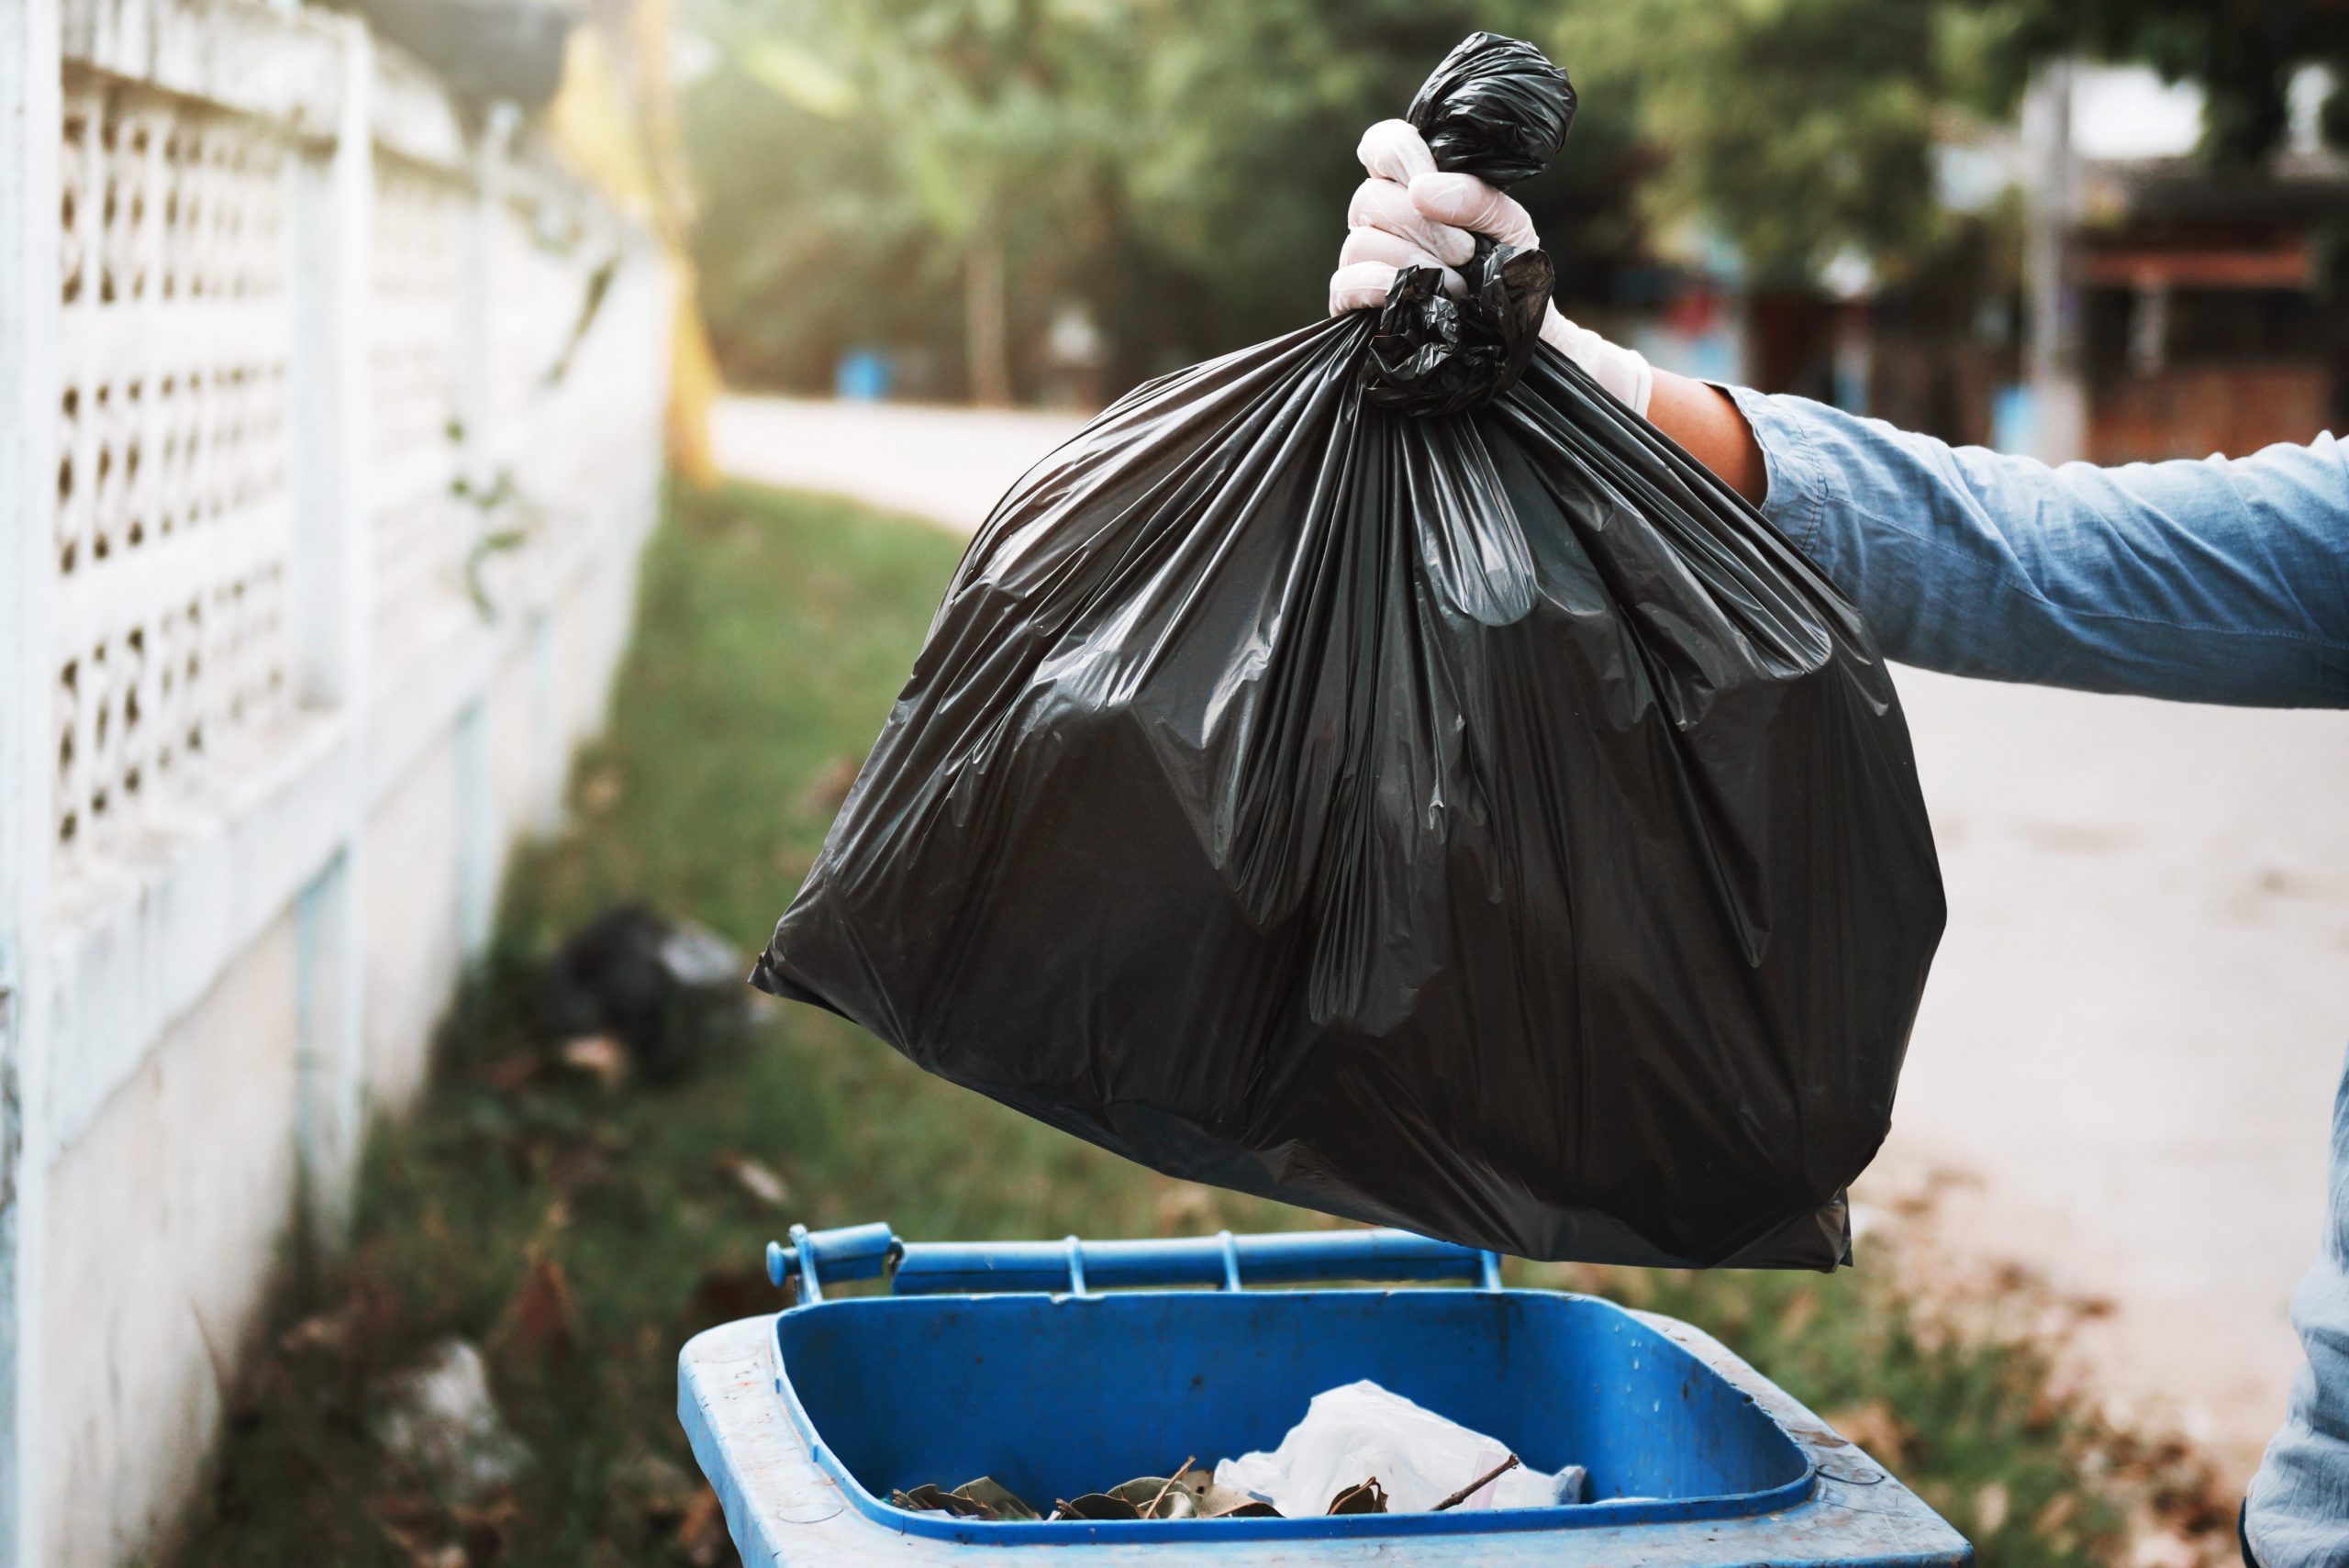 Things You Should Never Throw in the Garbage | Reader's Digest